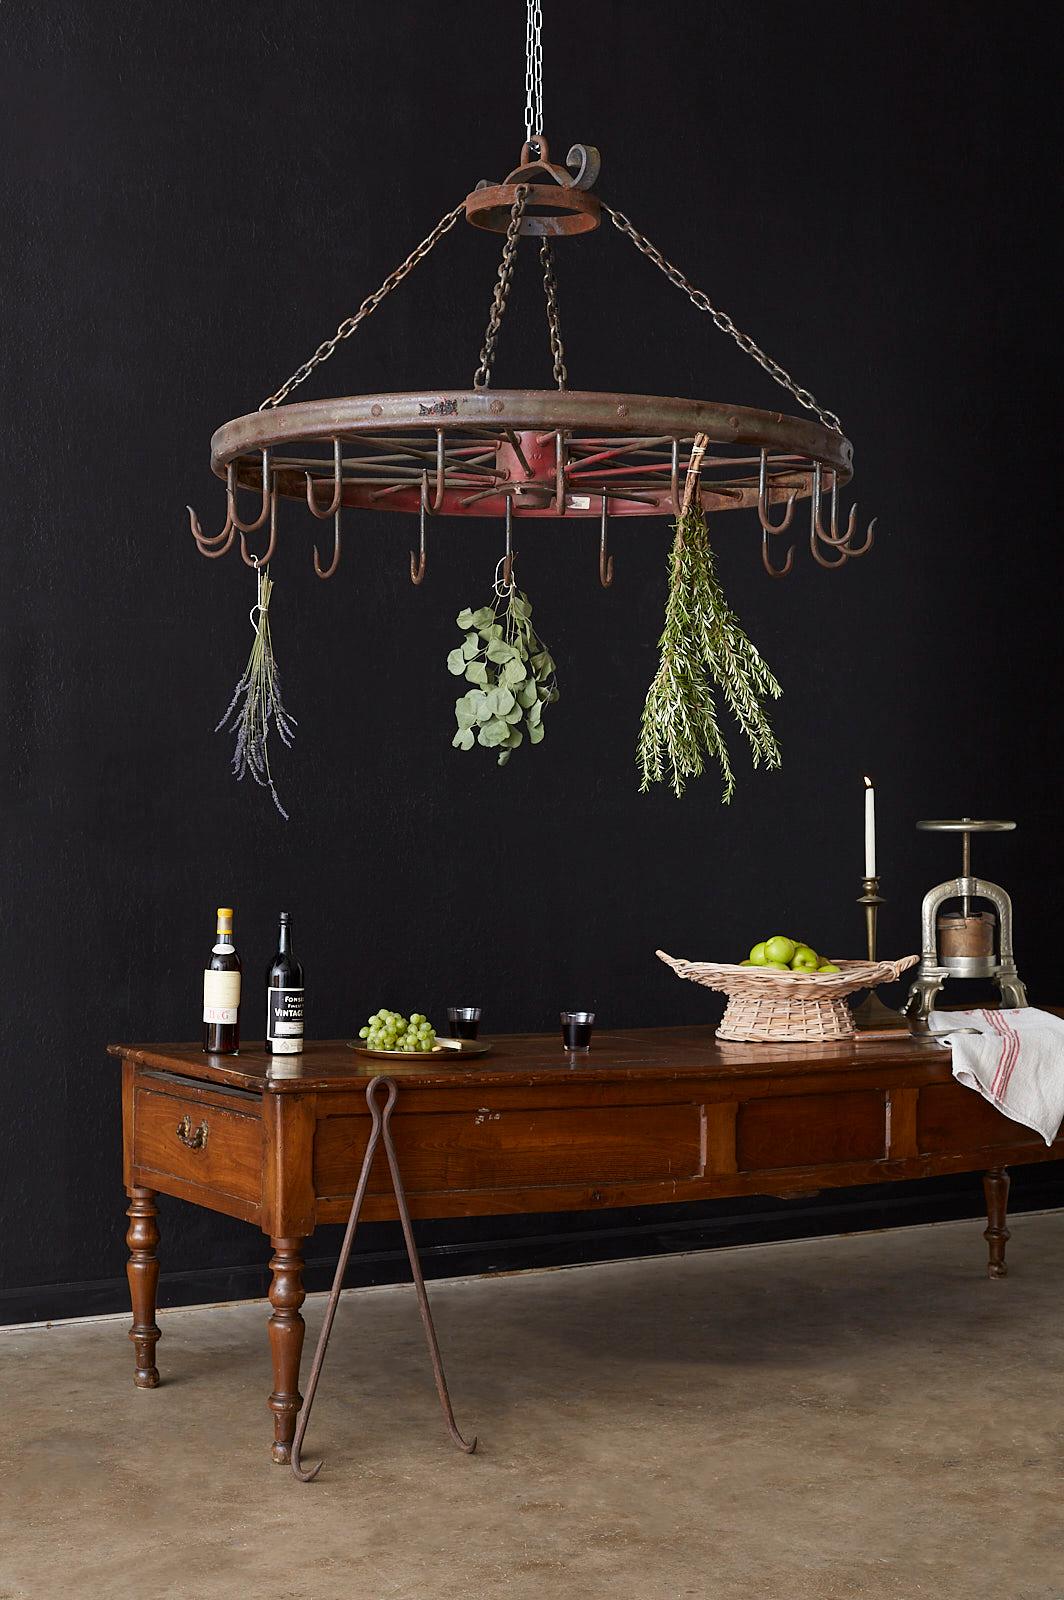 Rustic late 19th century American LaFrance iron wagon wheel reclaimed and repurposed into a large butchers rack or pot rack. This piece of American Folk Art can be the centerpiece of a working kitchen or electrified as a rustic chandelier fixture.